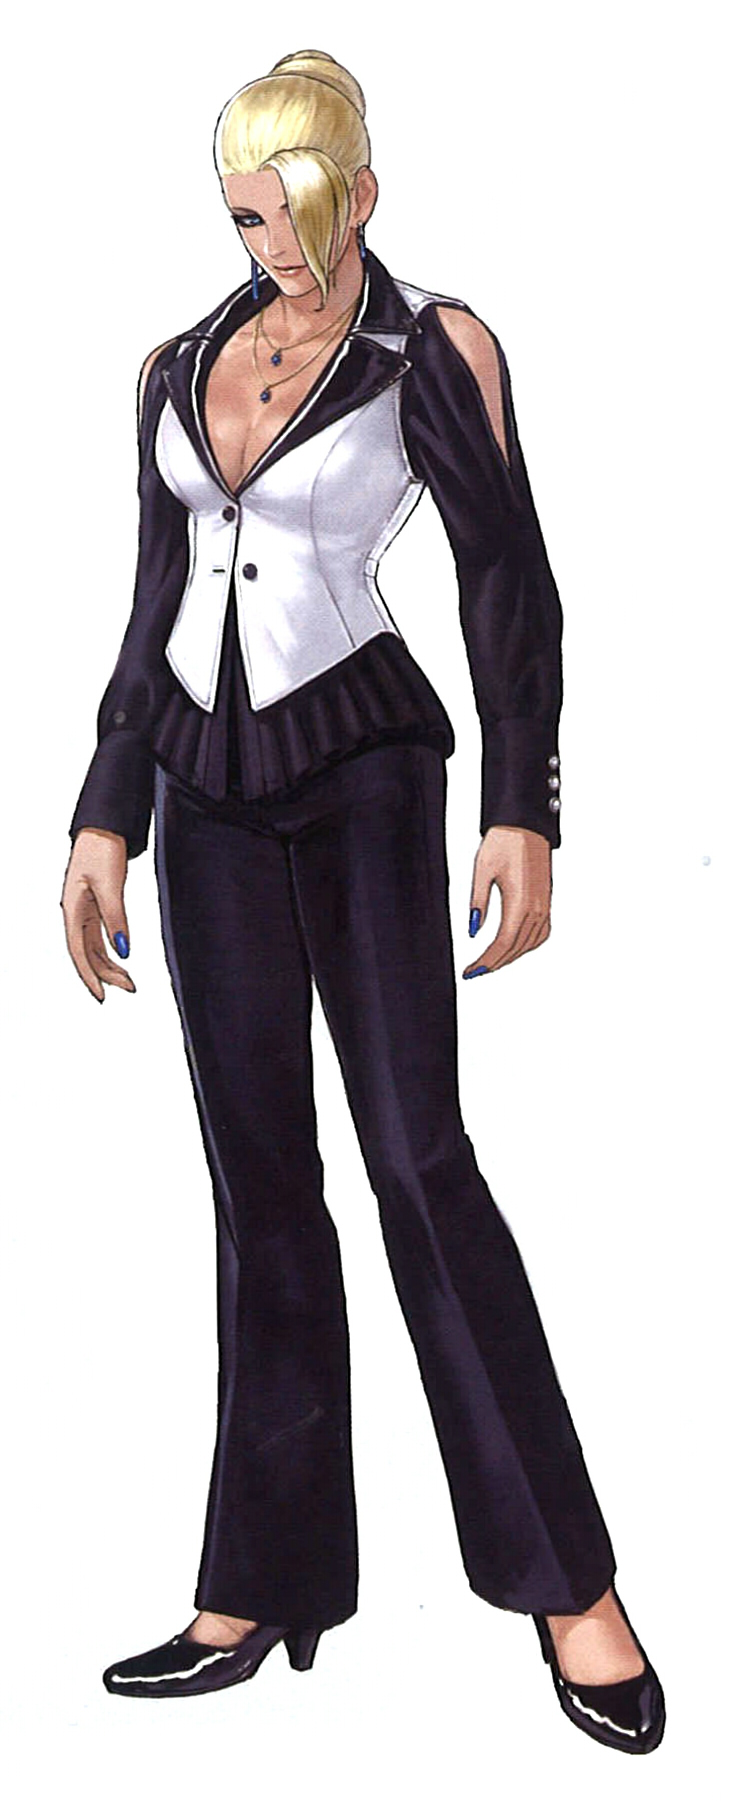 The King of Fighters '98/Mature - SuperCombo Wiki